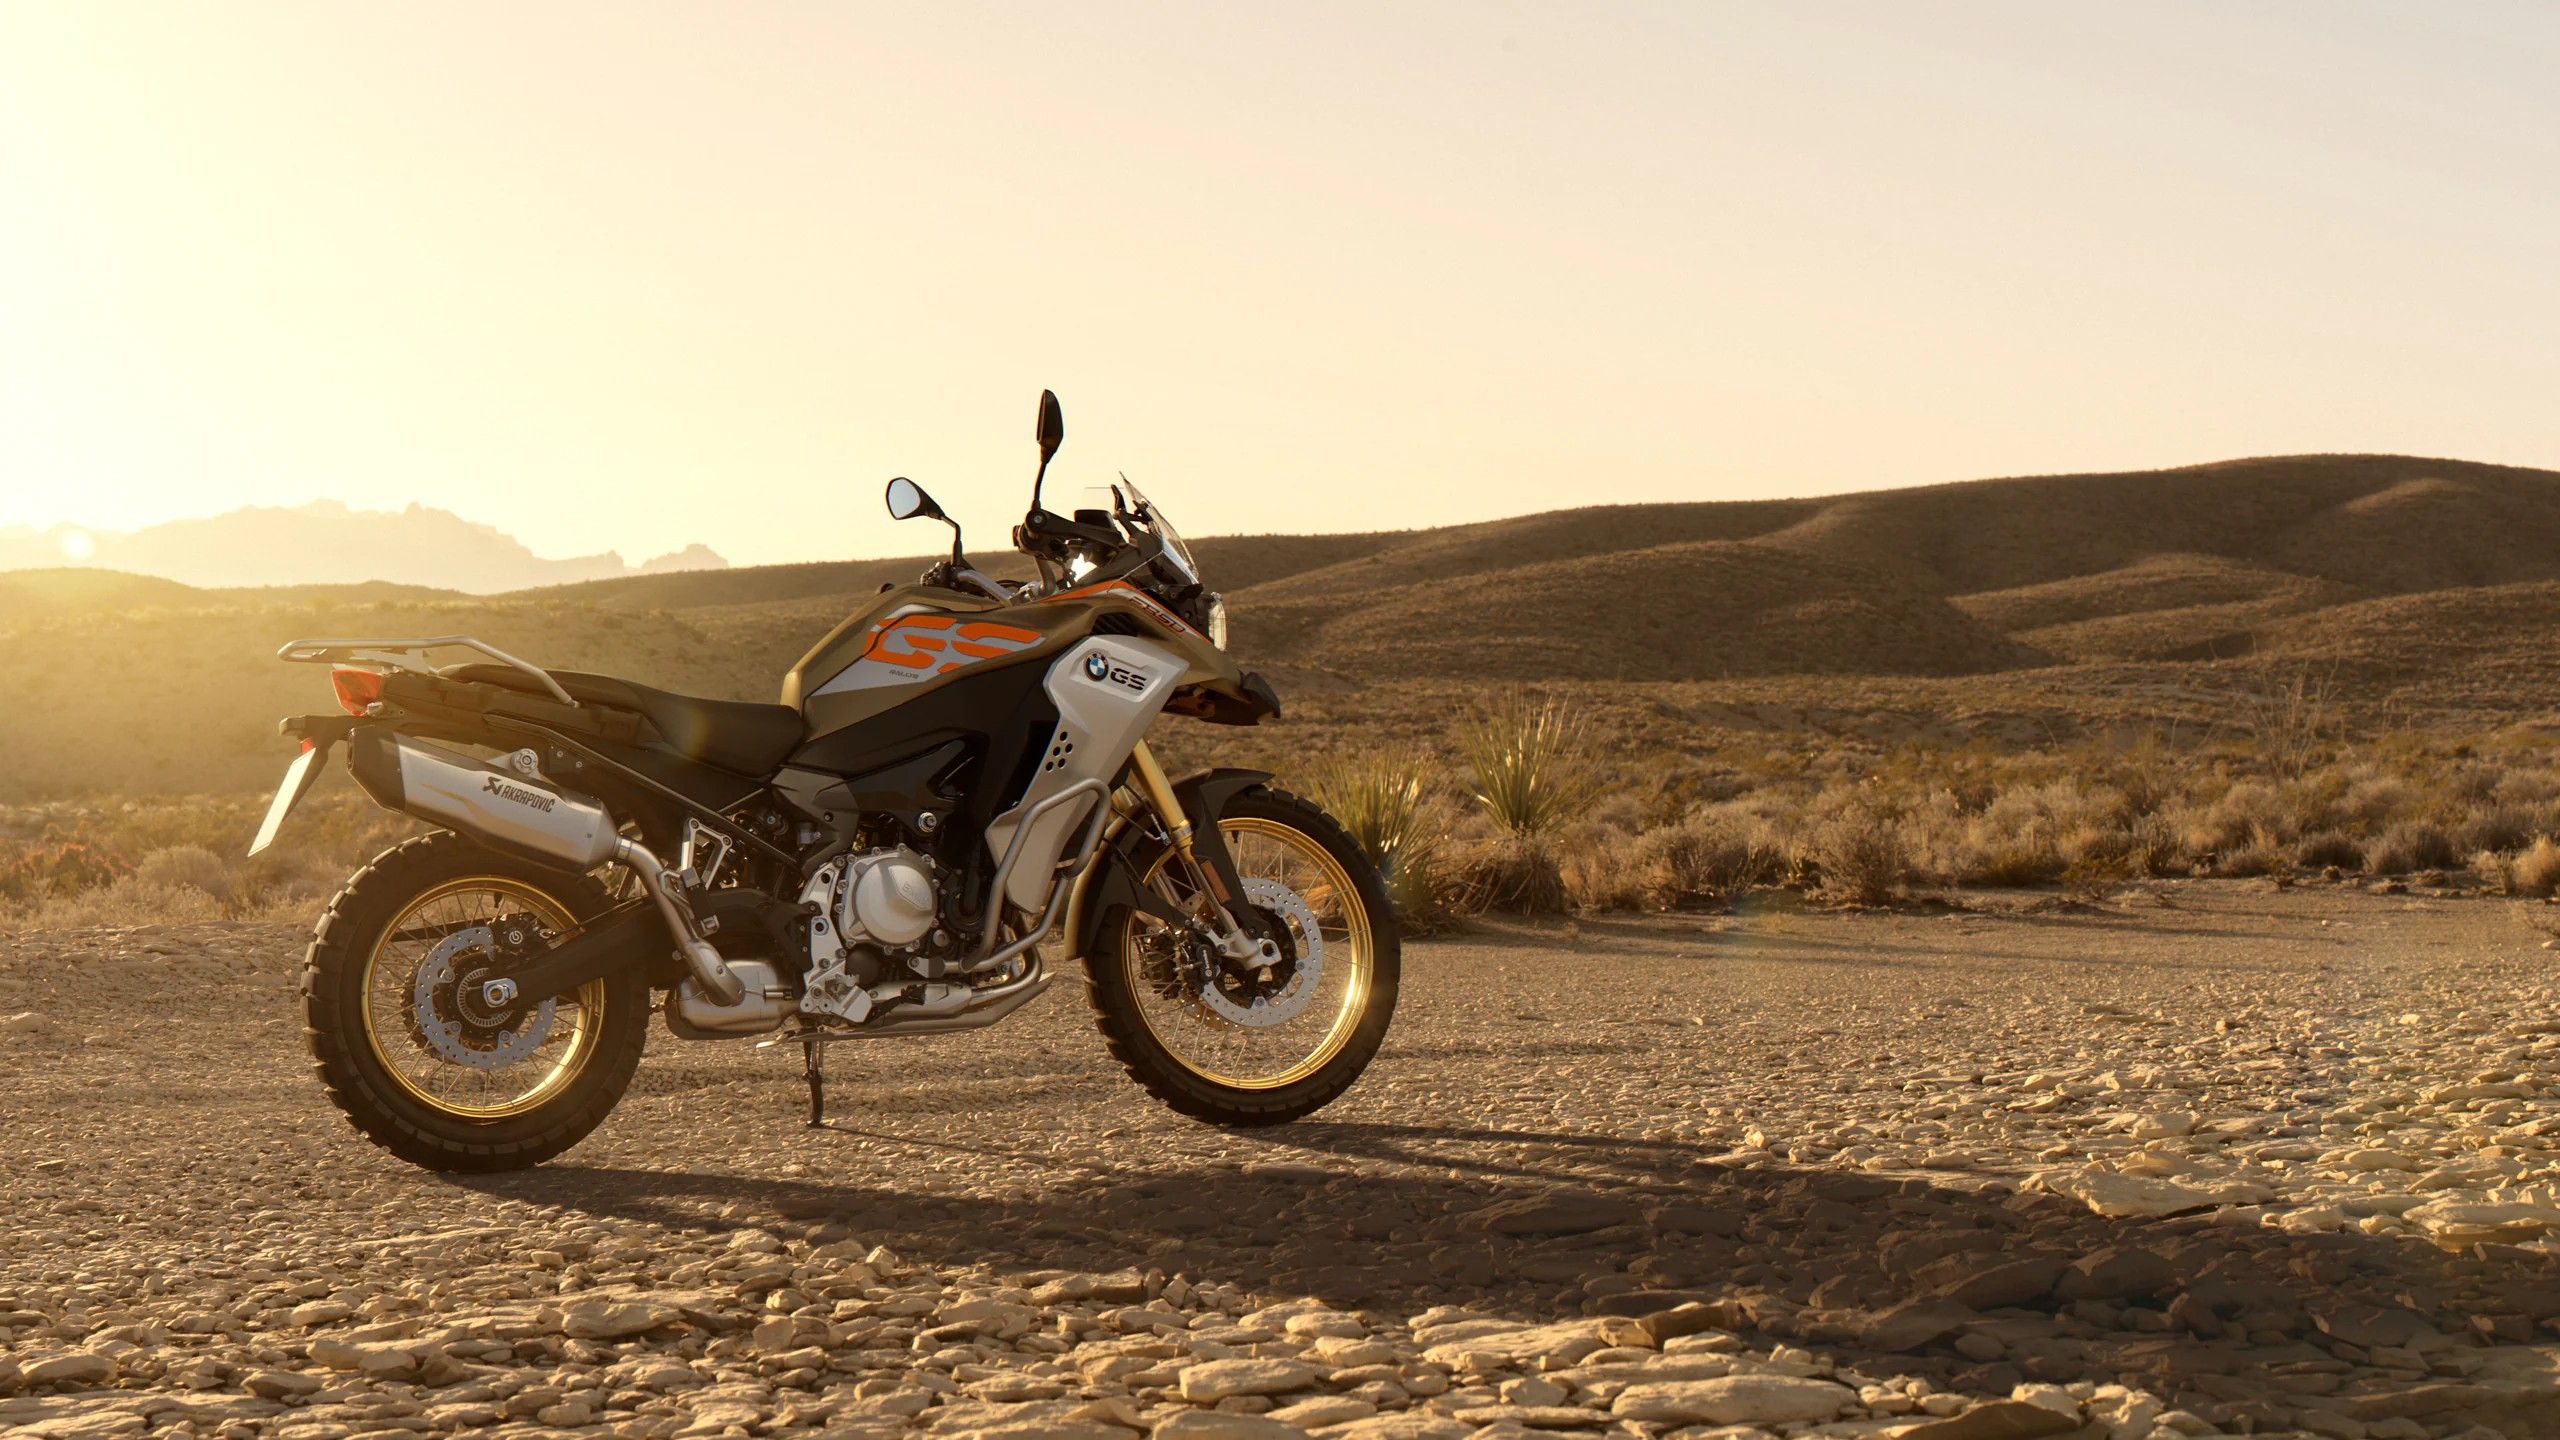 An Image Of A BMW F 850 GS In A Desert